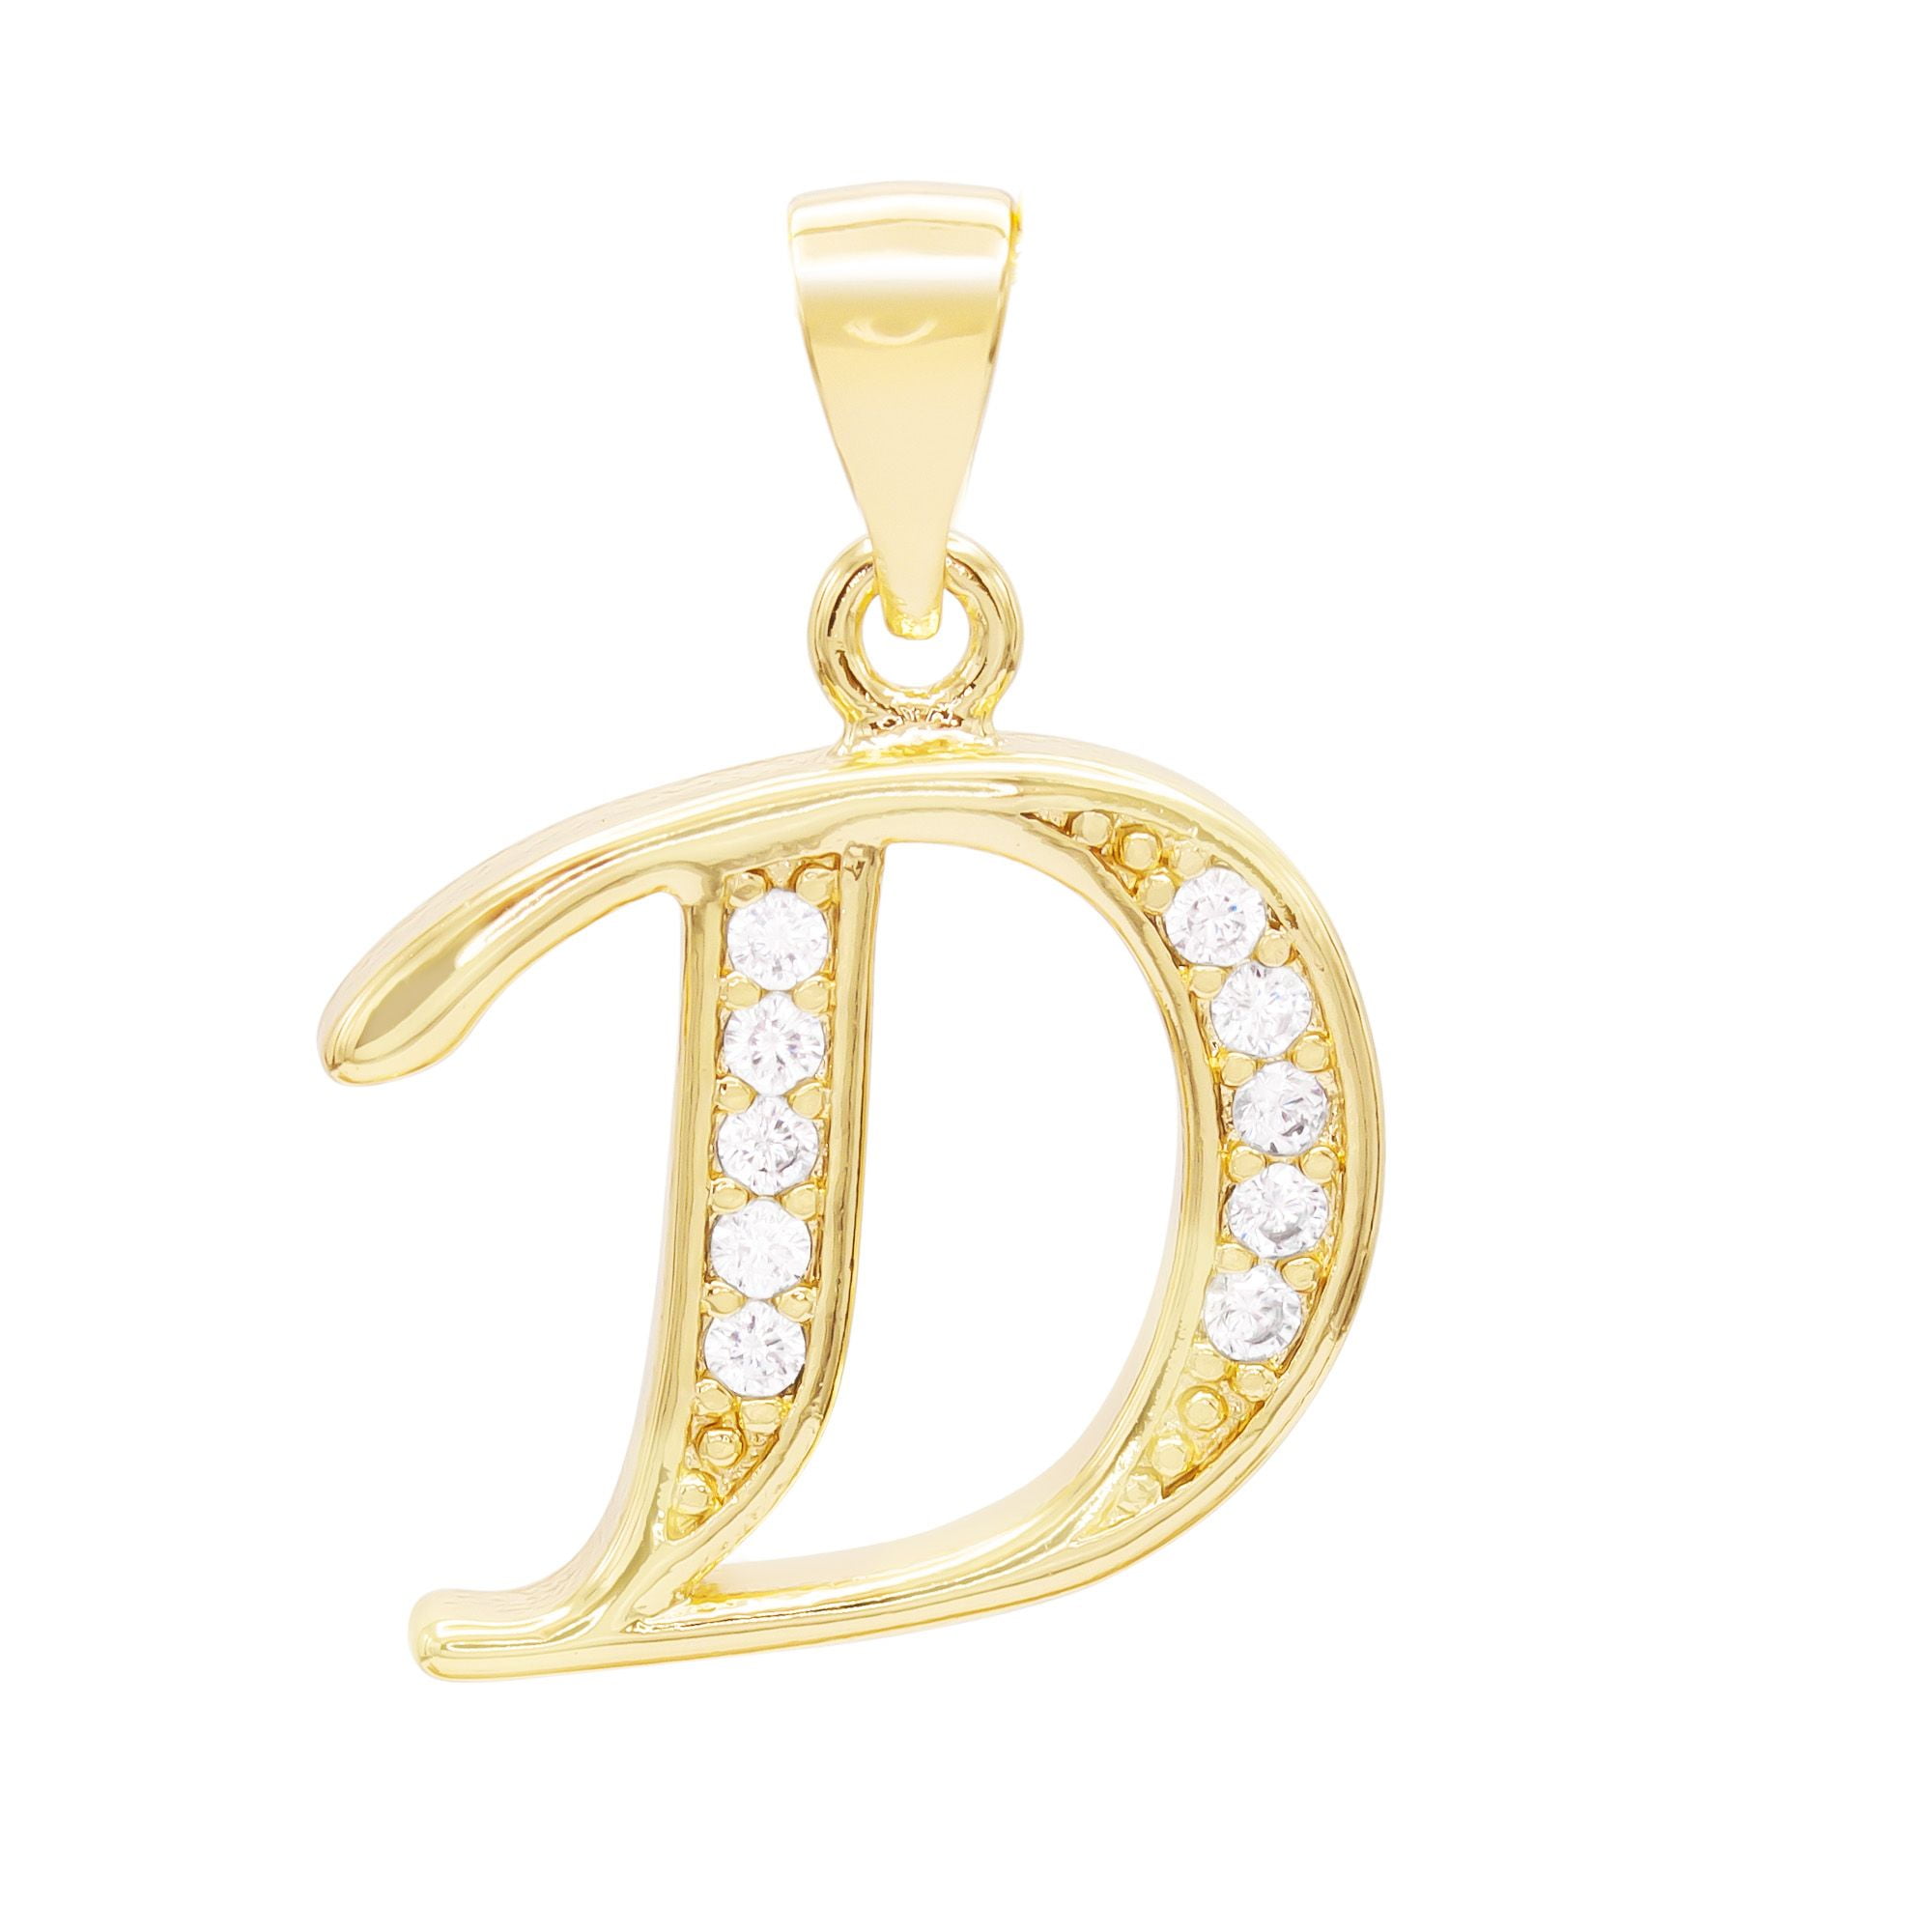 Large Round Brass Letter D Initial Charms for Bracelets or Pendants 1473D - 2 Pieces